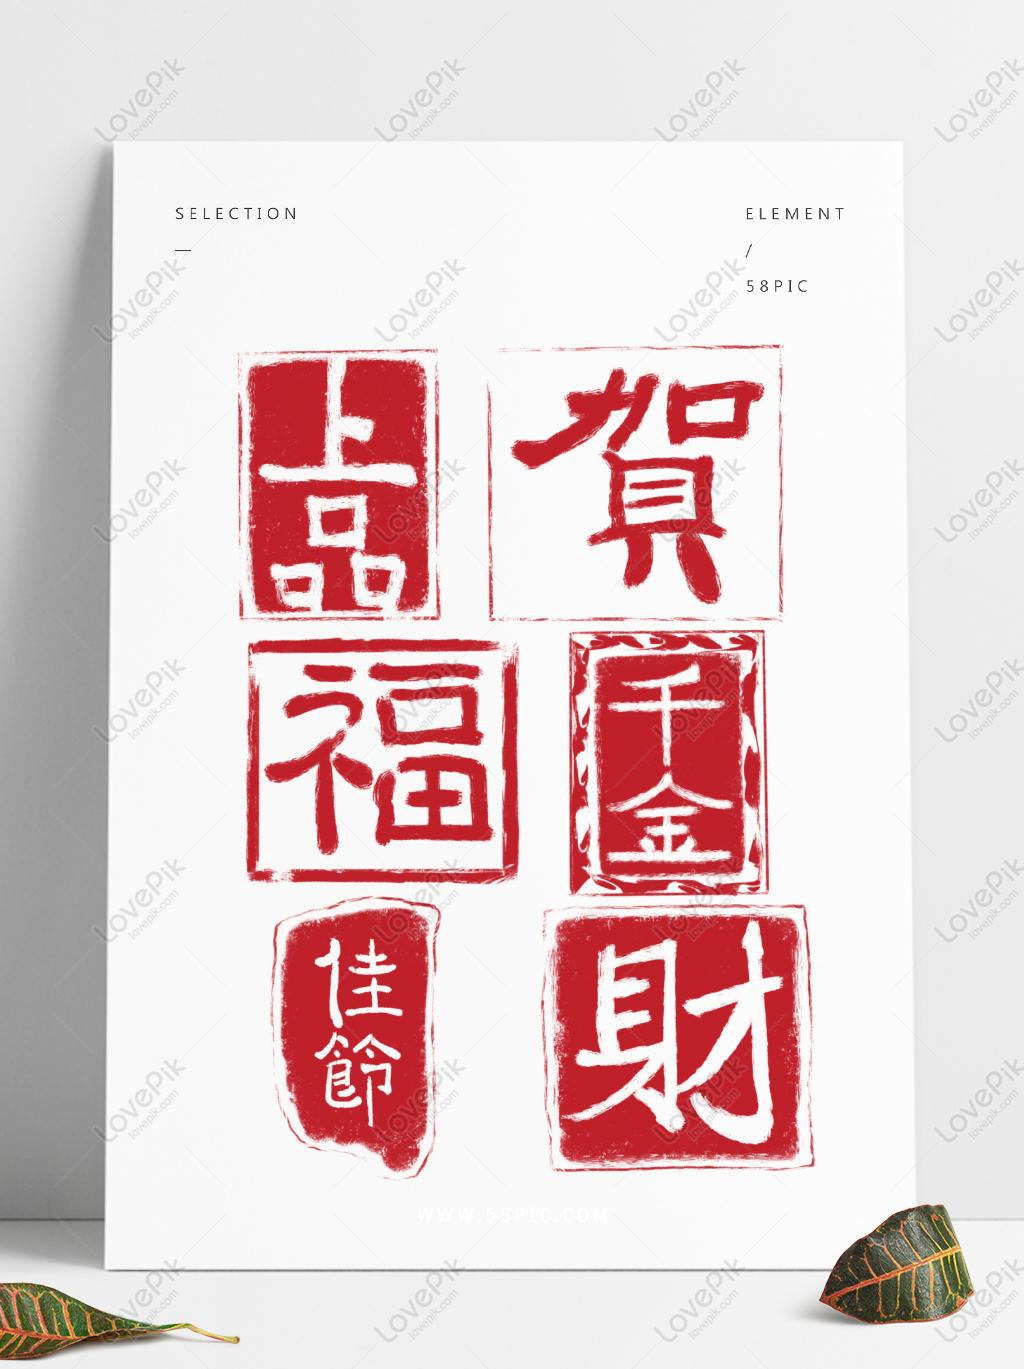 chinese characters font free download